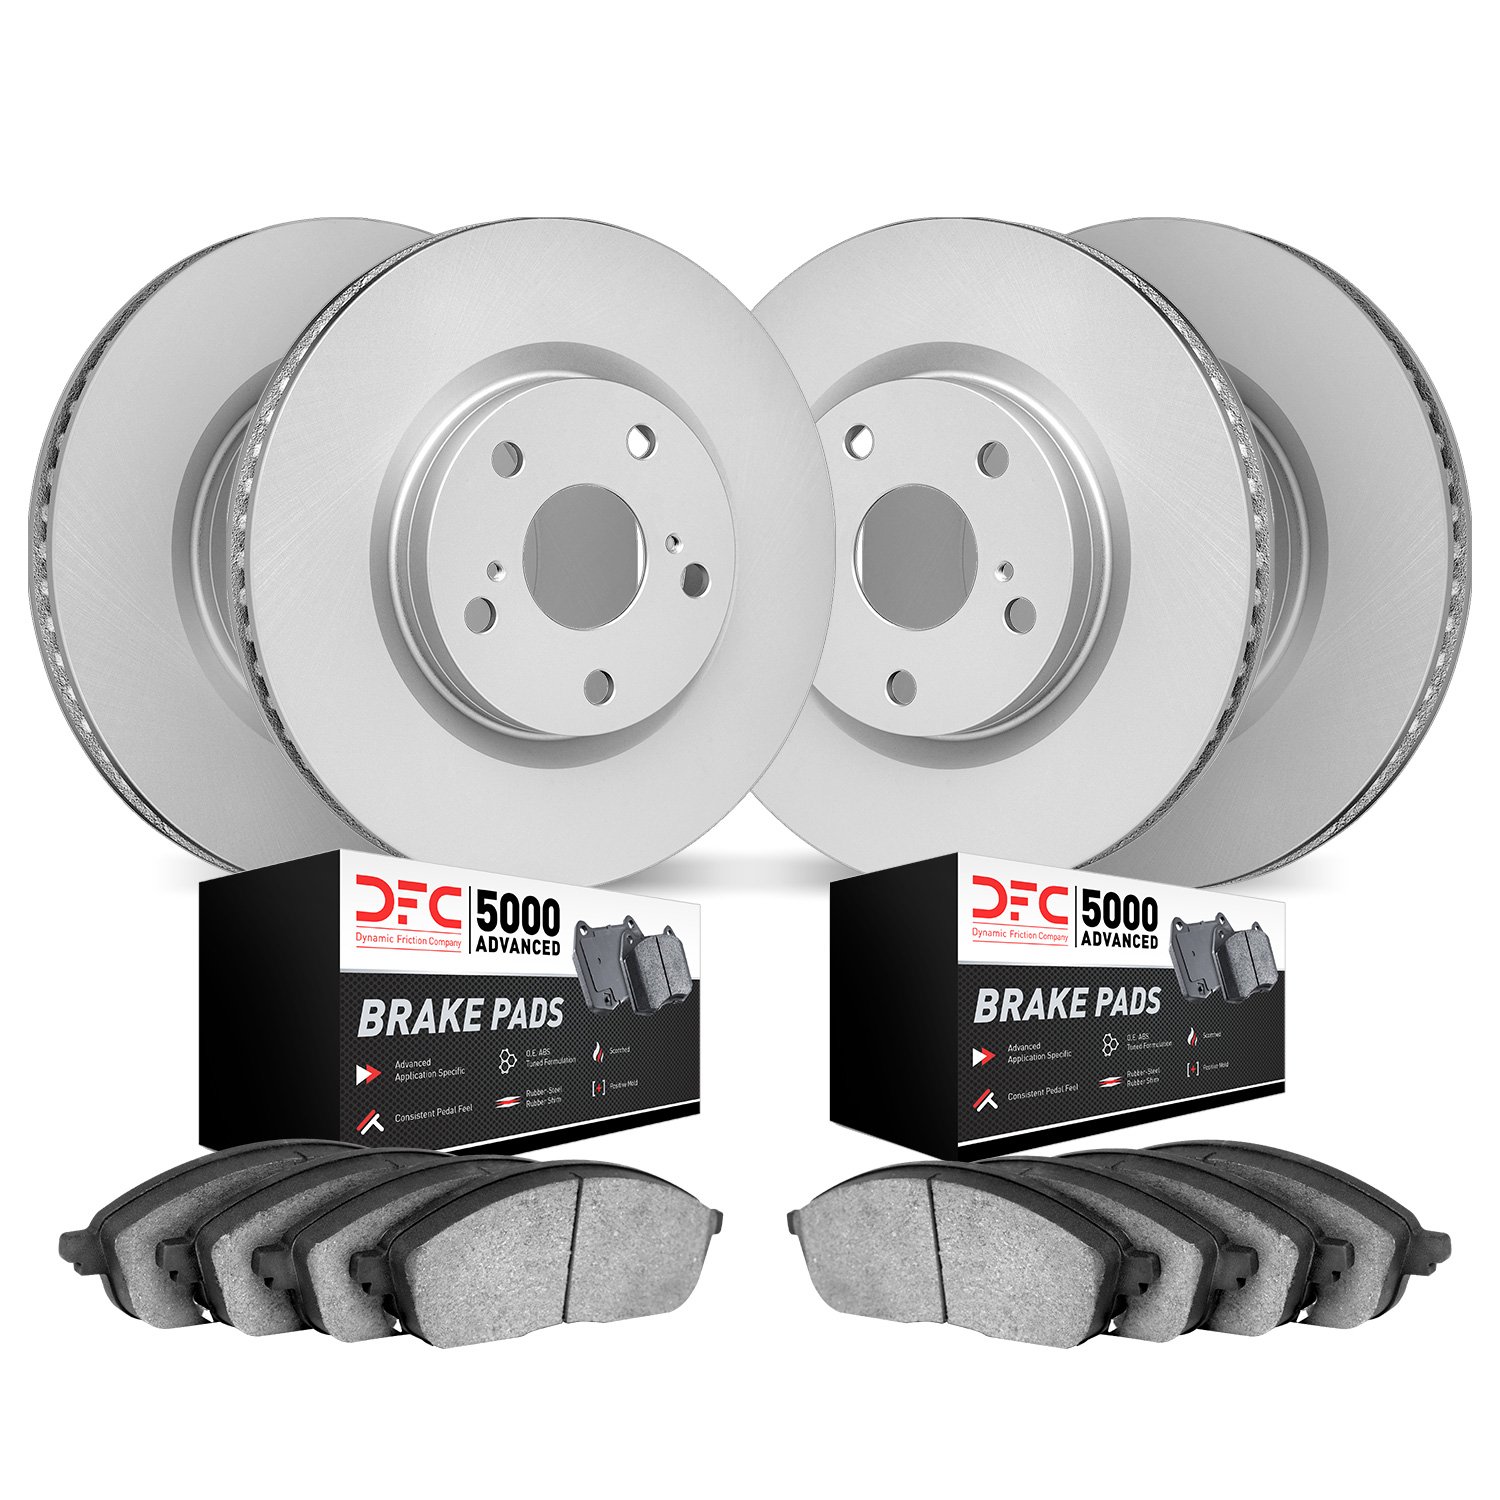 4504-54131 Geospec Brake Rotors w/5000 Advanced Brake Pads Kit, 2011-2014 Ford/Lincoln/Mercury/Mazda, Position: Front and Rear